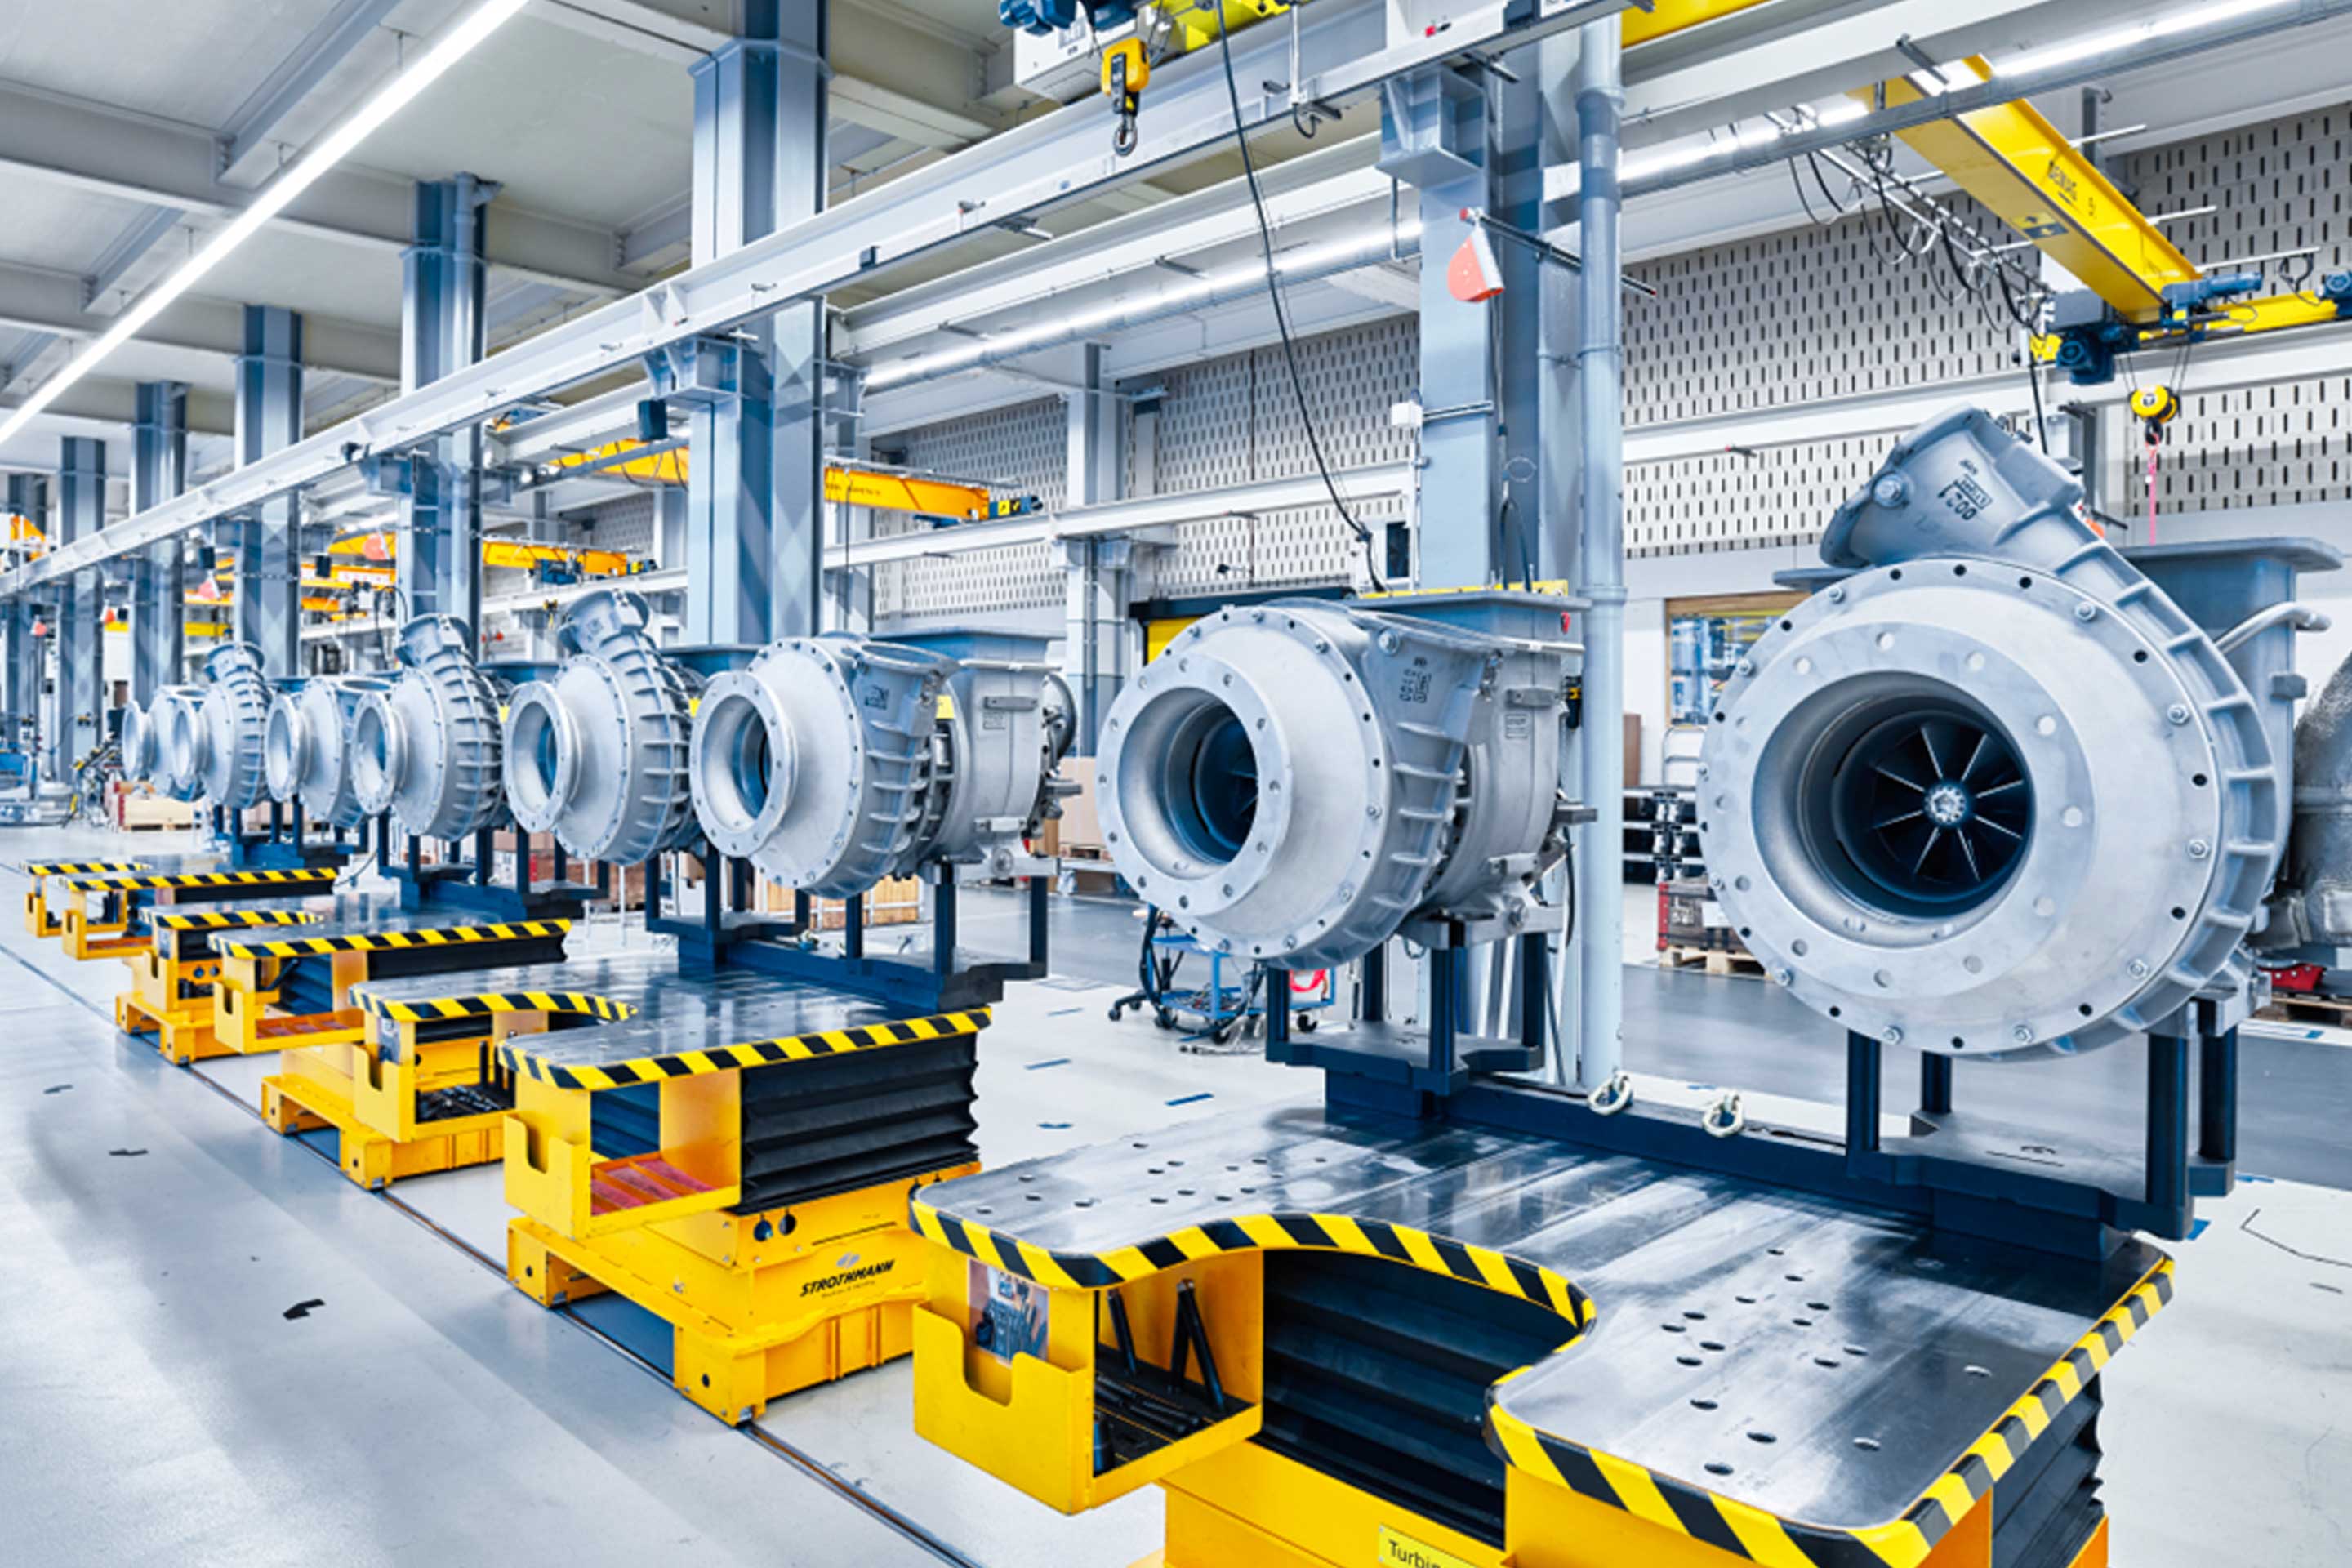 An image of a row of Accelleron turbochargers to highlight how turbocharging can help decarbonization